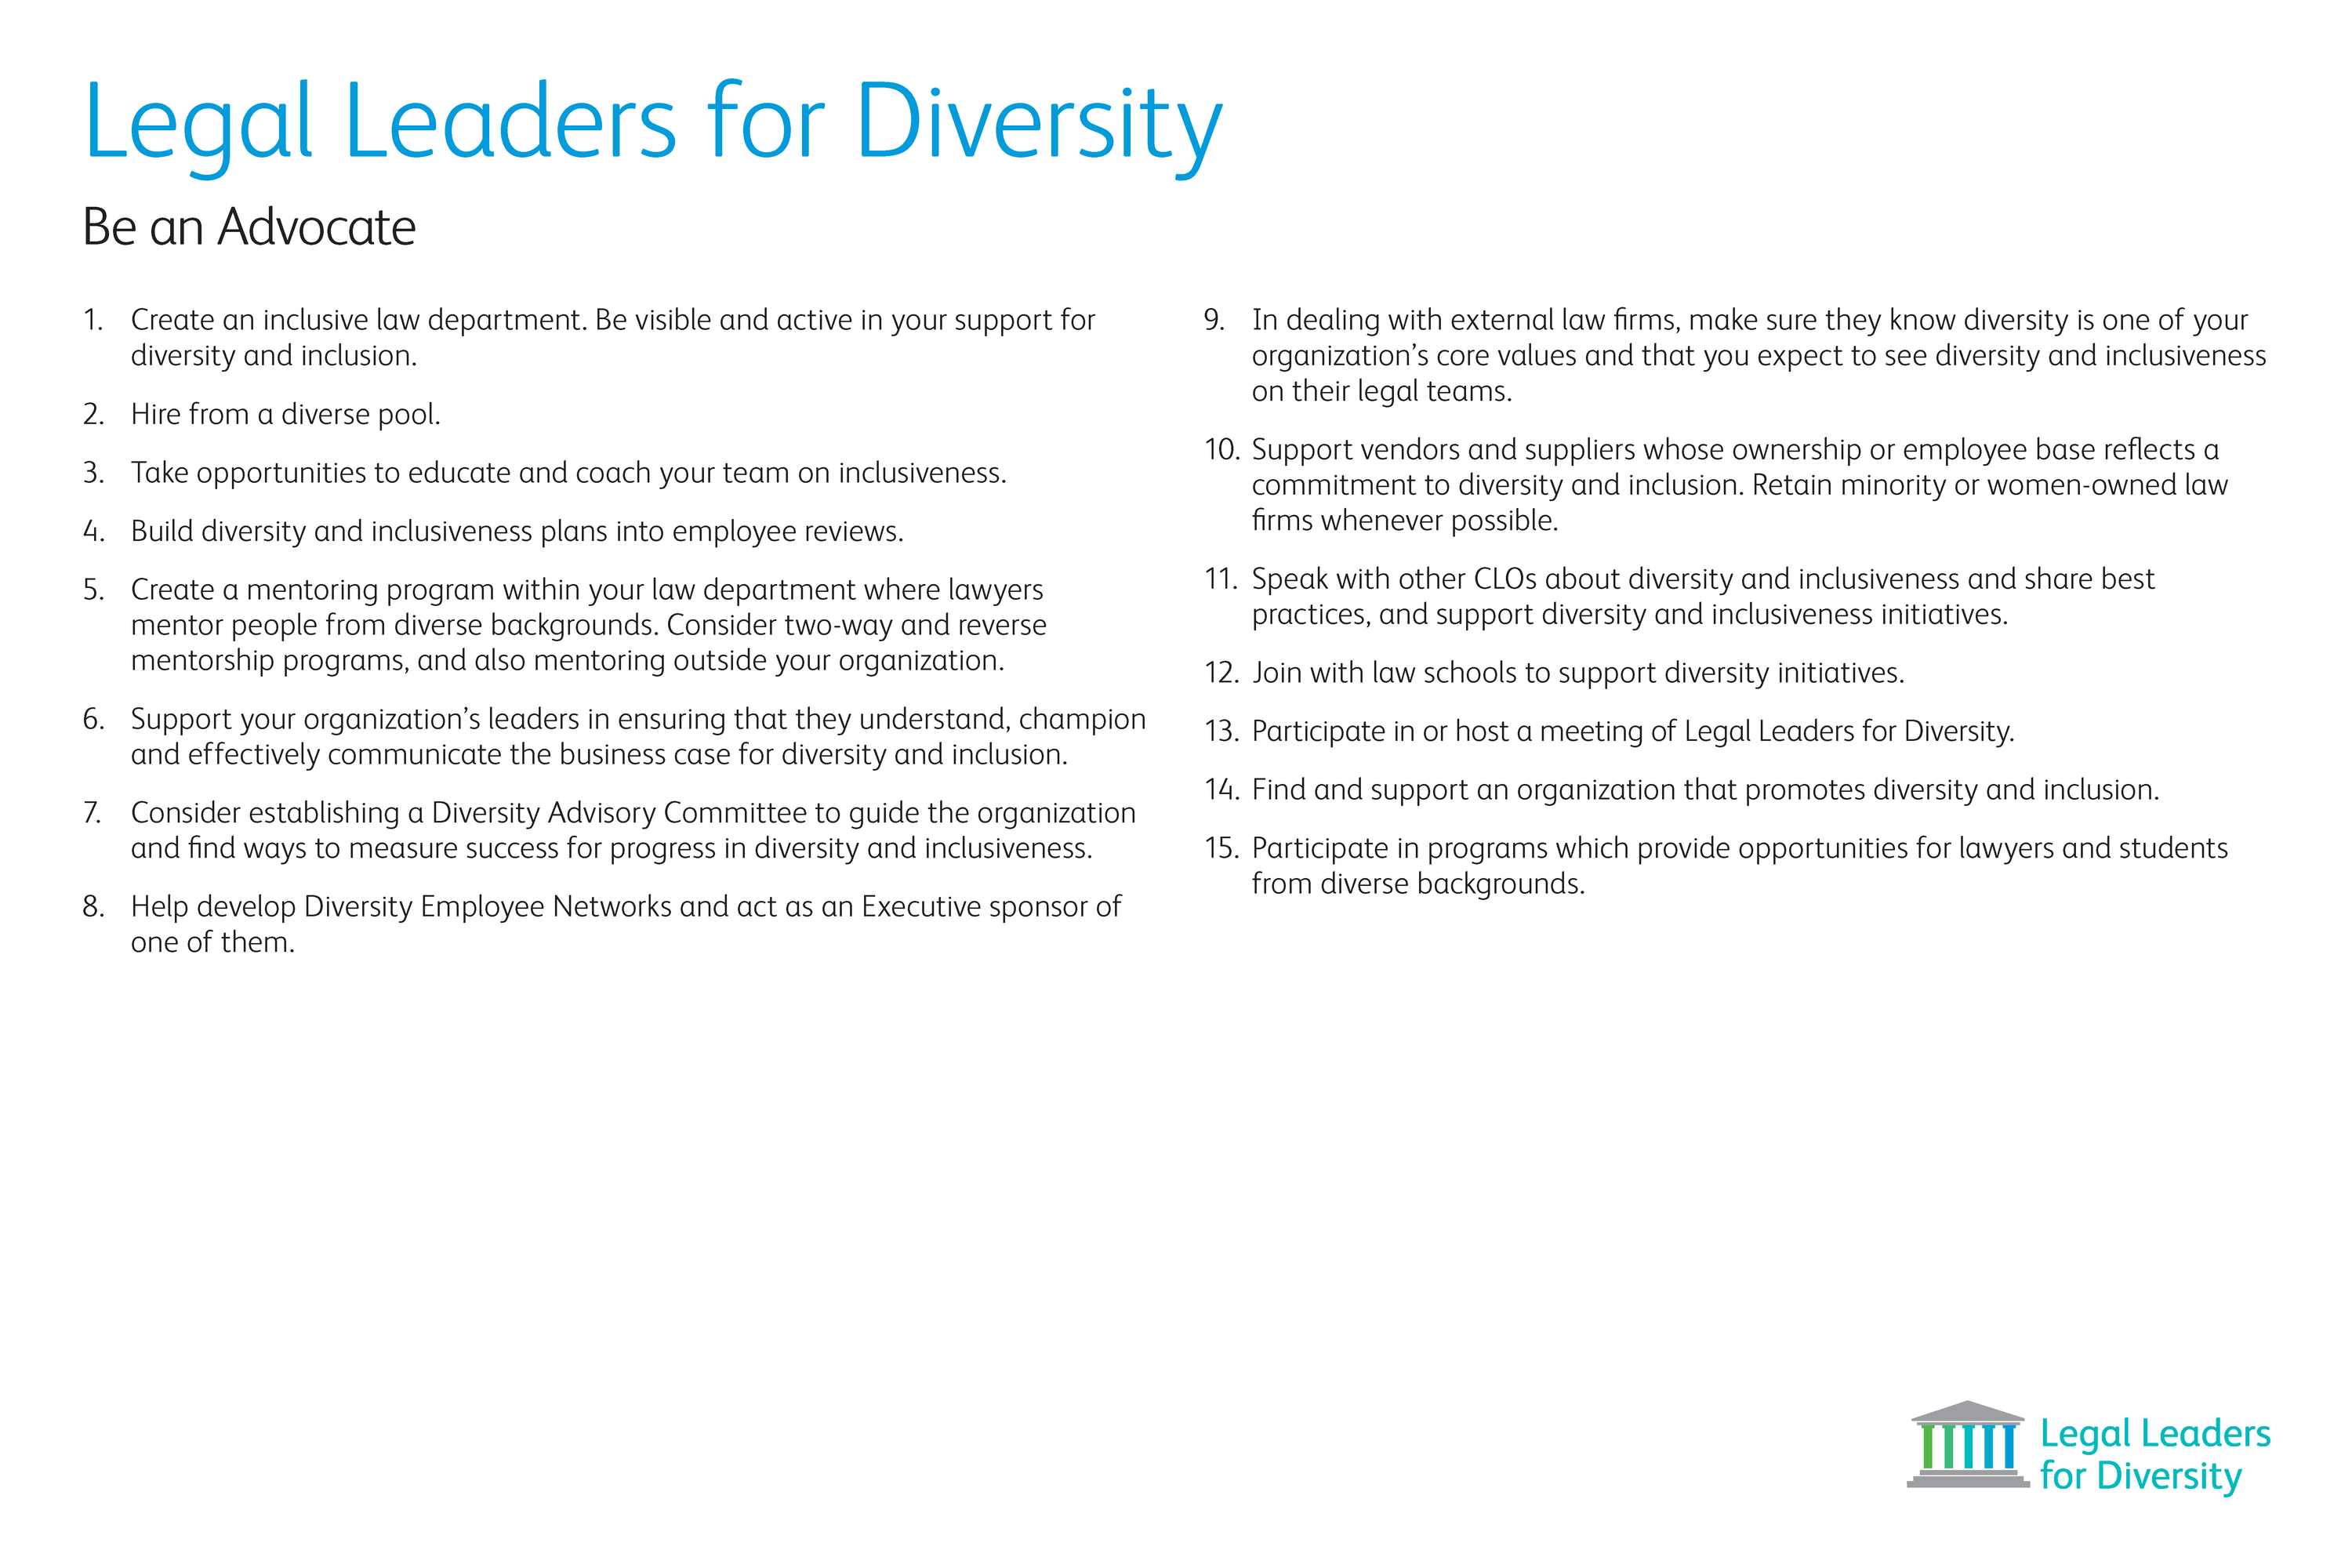 Legal leaders for diversity poster page 2